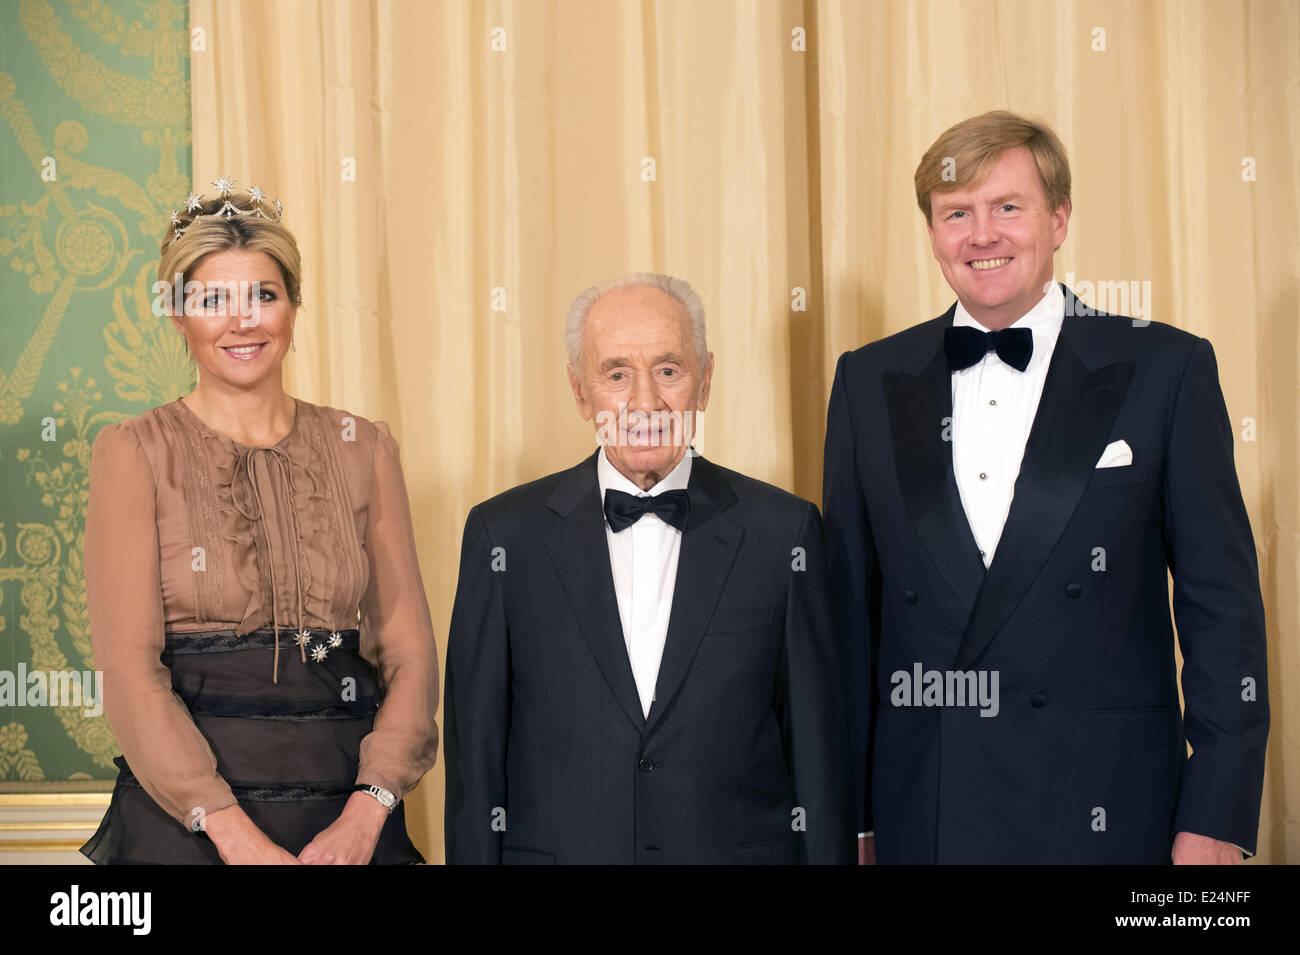 Queen Maxima, Shimon Peres, King Willem Alexander pose for the media before the Statebanquet at Palace Noordeinde in The Hague  Where: The Hague, Holland When: 01 Oct 2013 Stock Photo